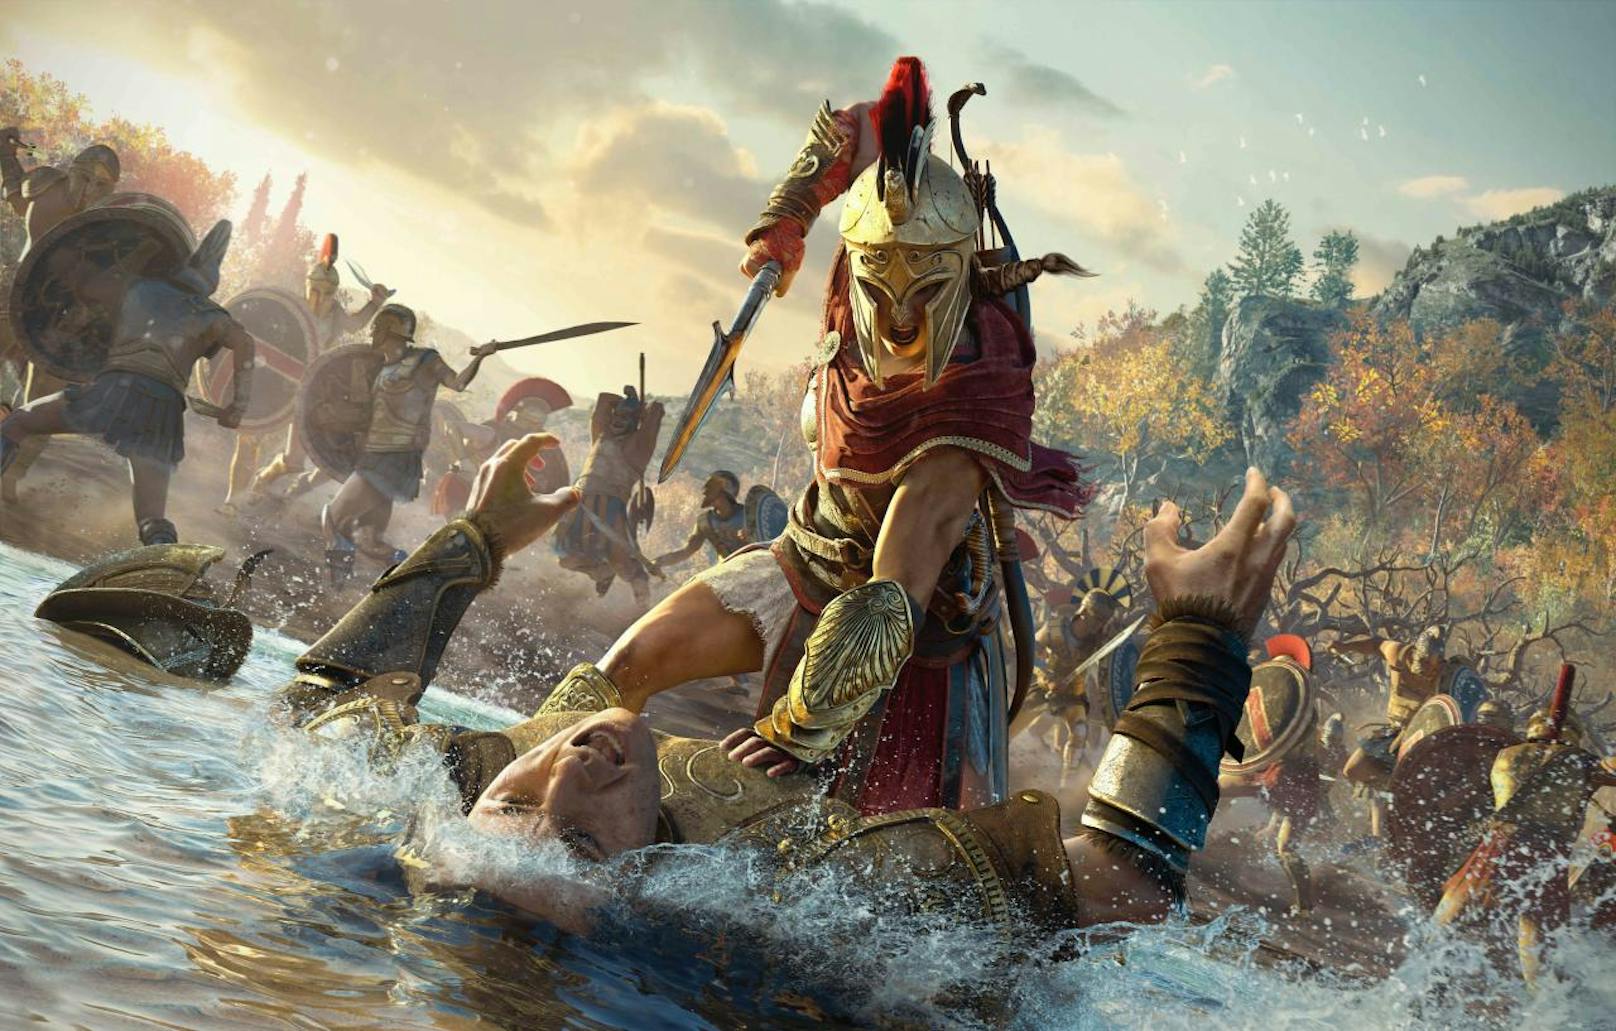  <a href="https://www.heute.at/digital/games/story/Assassin-s-Creed-Odyssey-Test-Review-AC-blutiger-denn-je--50076412" target="_blank">Assassin's Creed Odyssey</a>